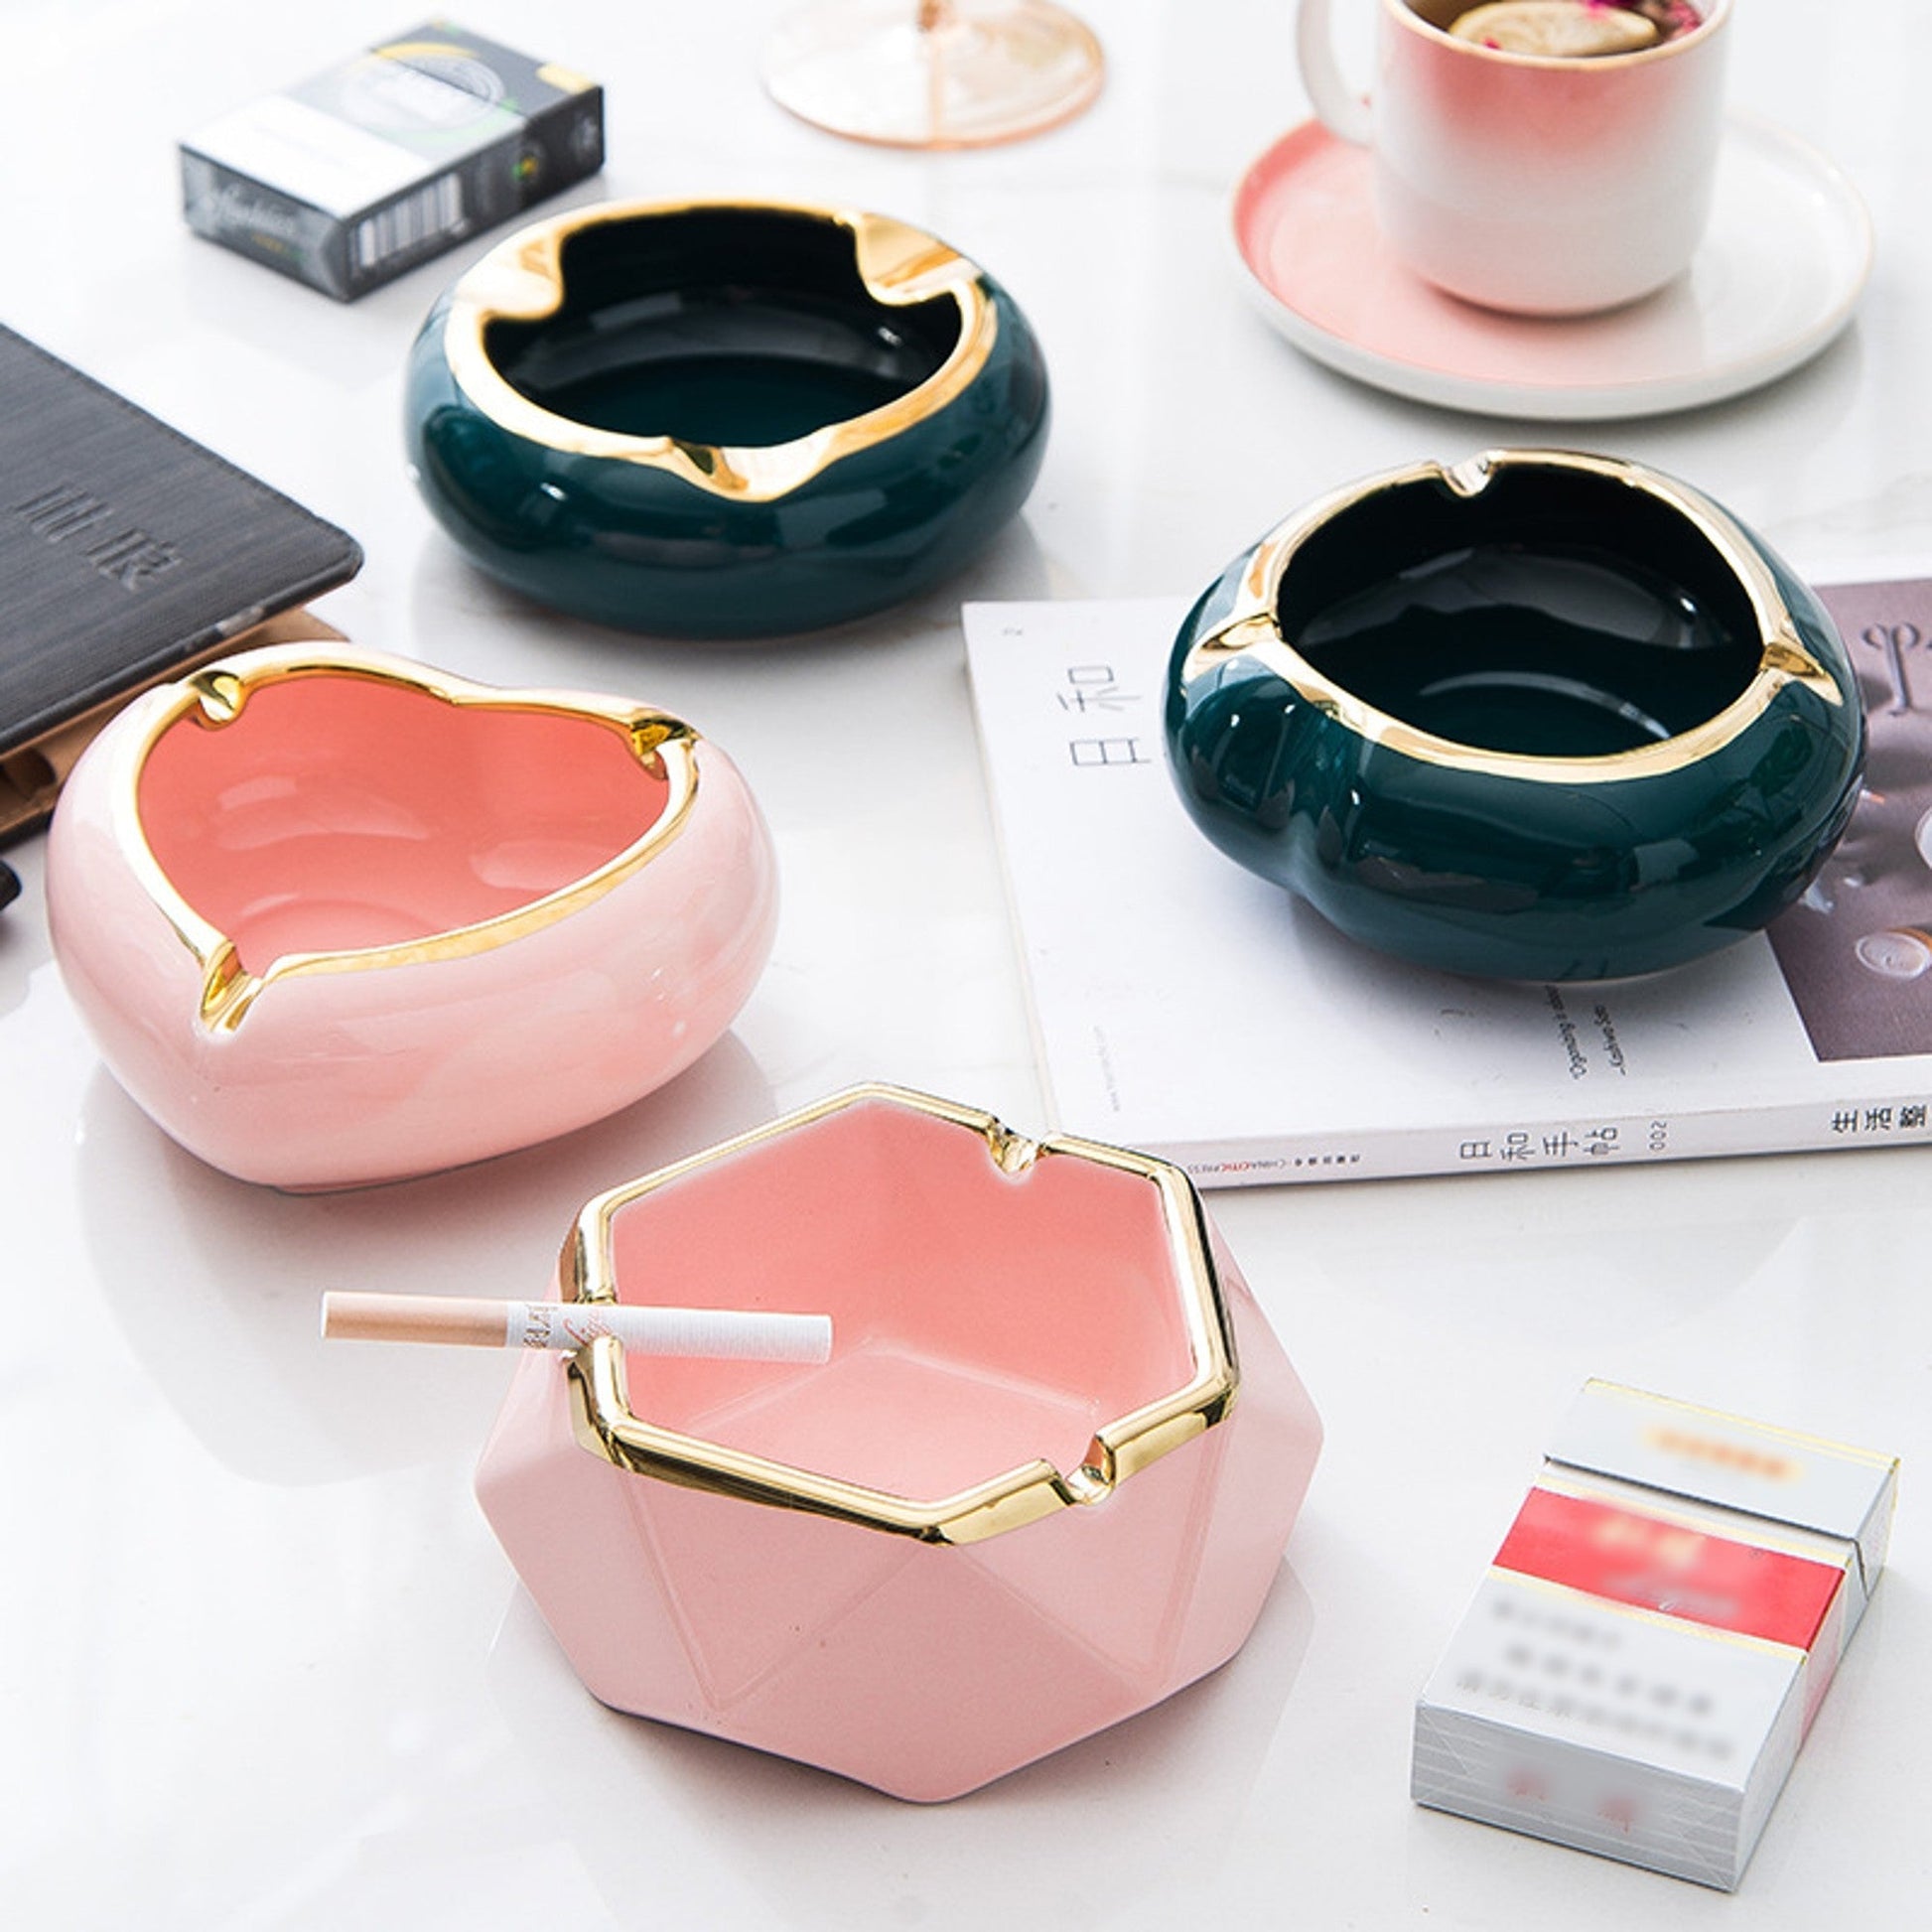 Nordic Ceramic Ashtray with Gold Rim - Available in Pink or Green – Mary  Jane Toolbox